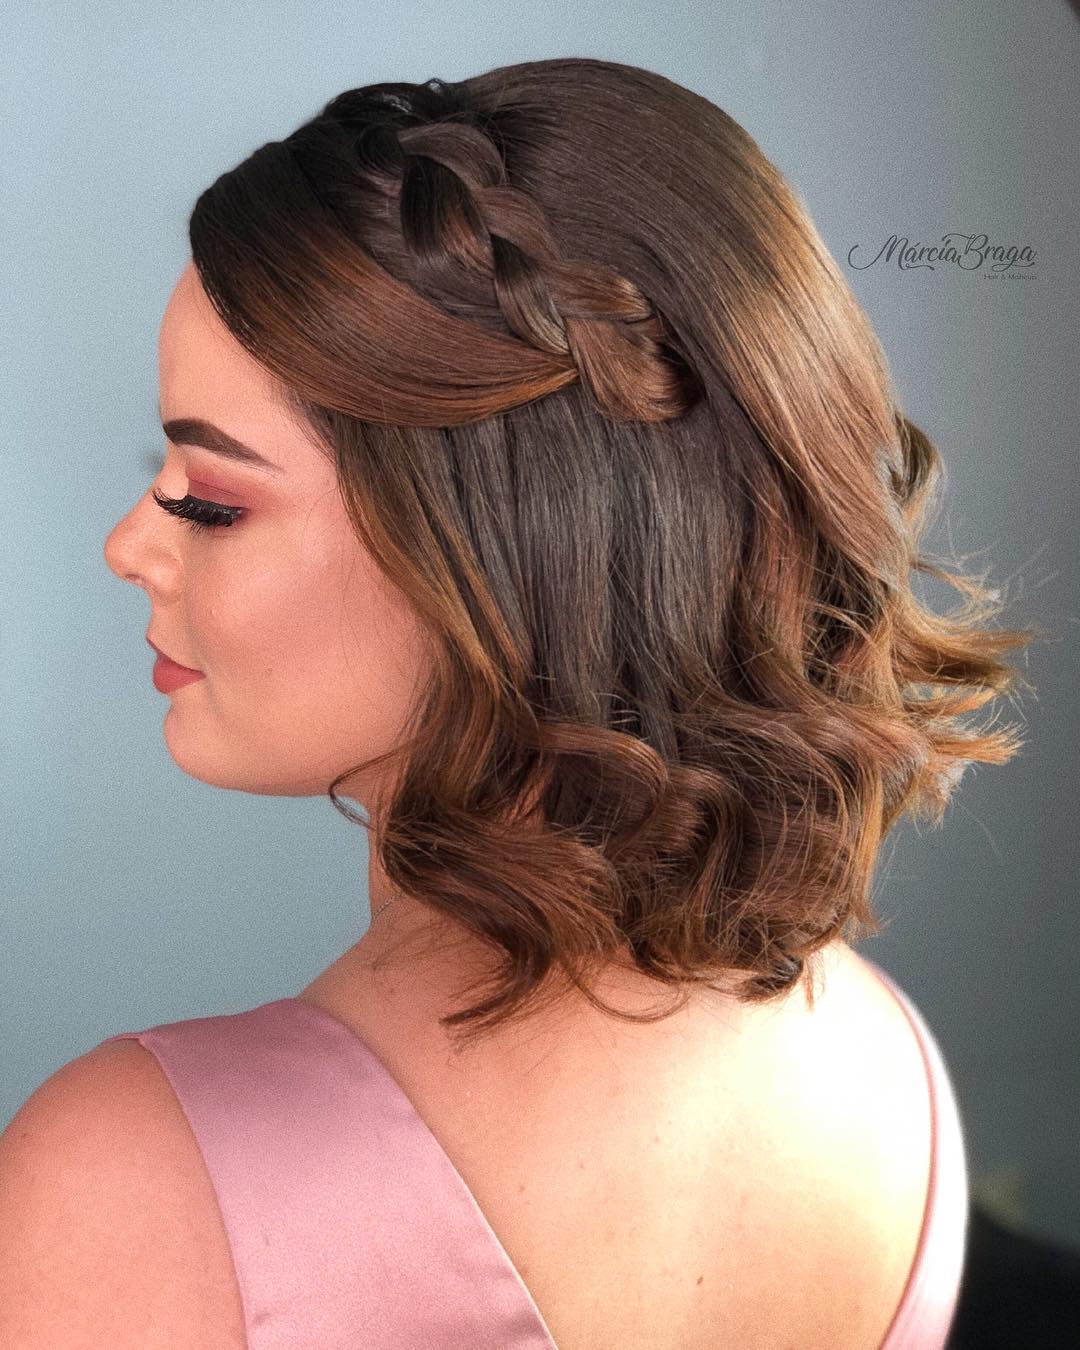 crown braid hairstyle for gown for short hair